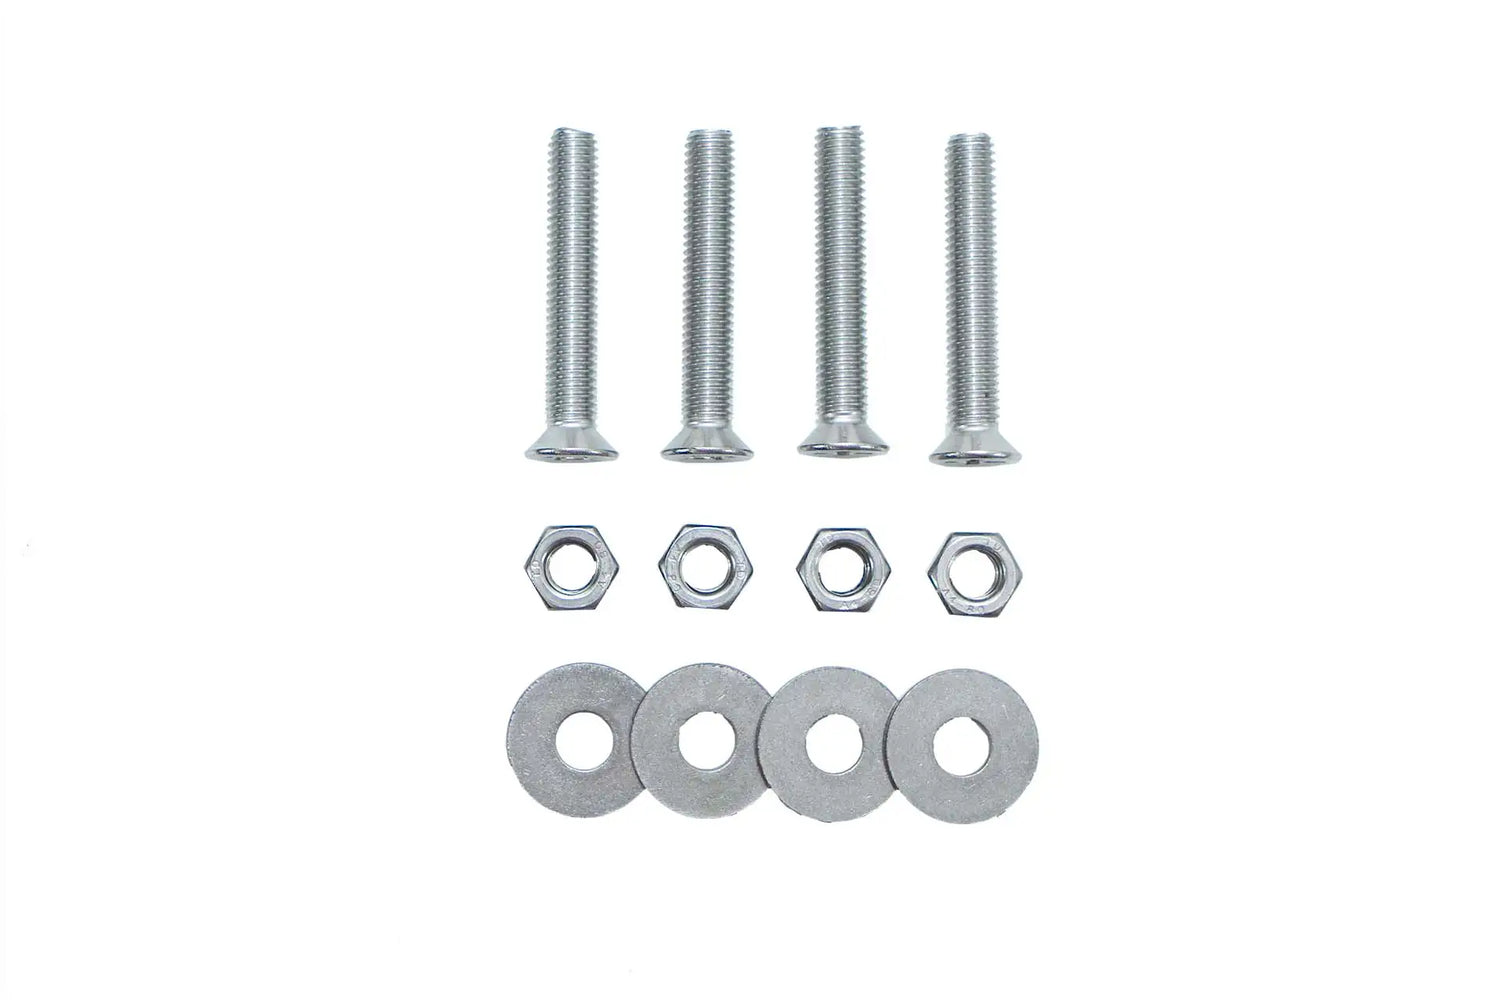 Replacement screws for Lagun wall mounting plate M8